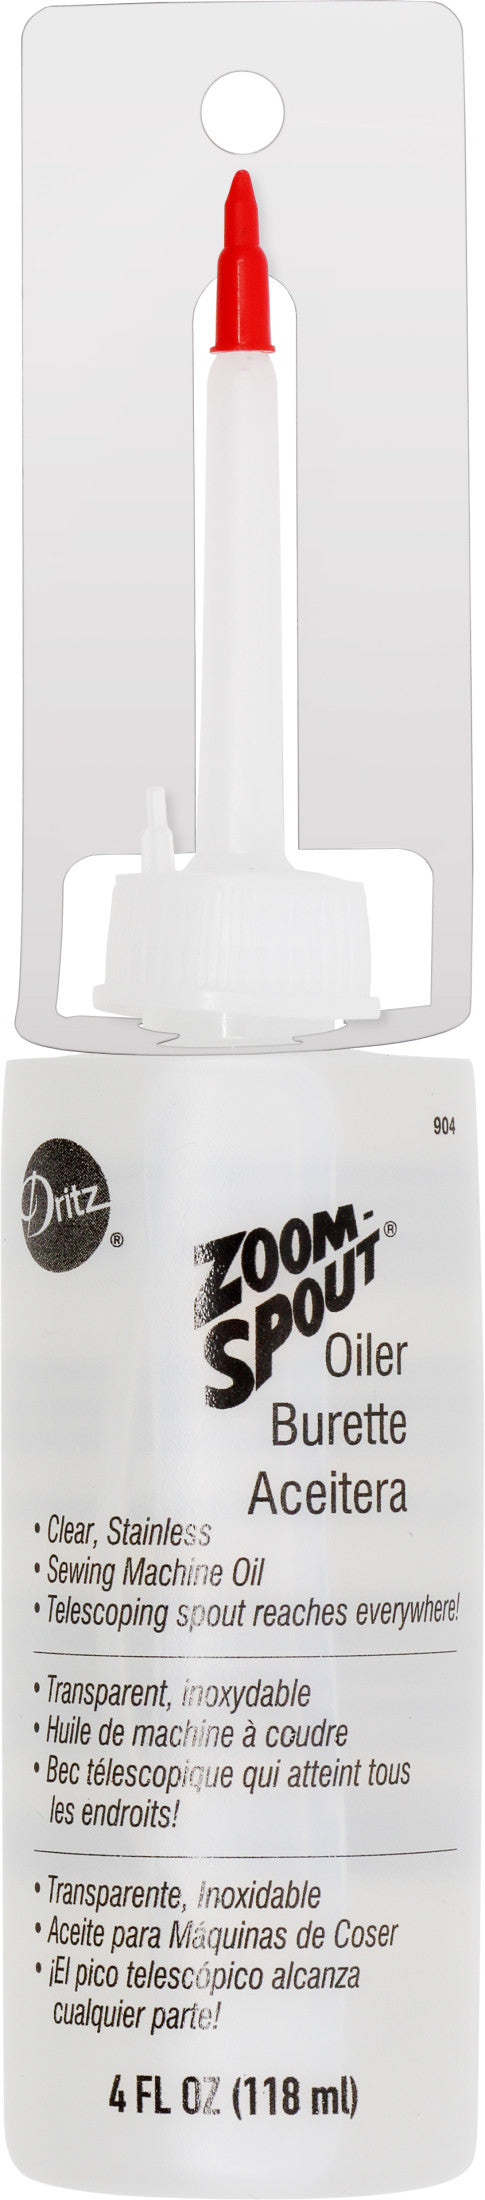 12 BOTTLES (1 CASE) ZOOM SPOUT OILER - 4 OZ CLEAR WHITE SEWING MACHINE OIL